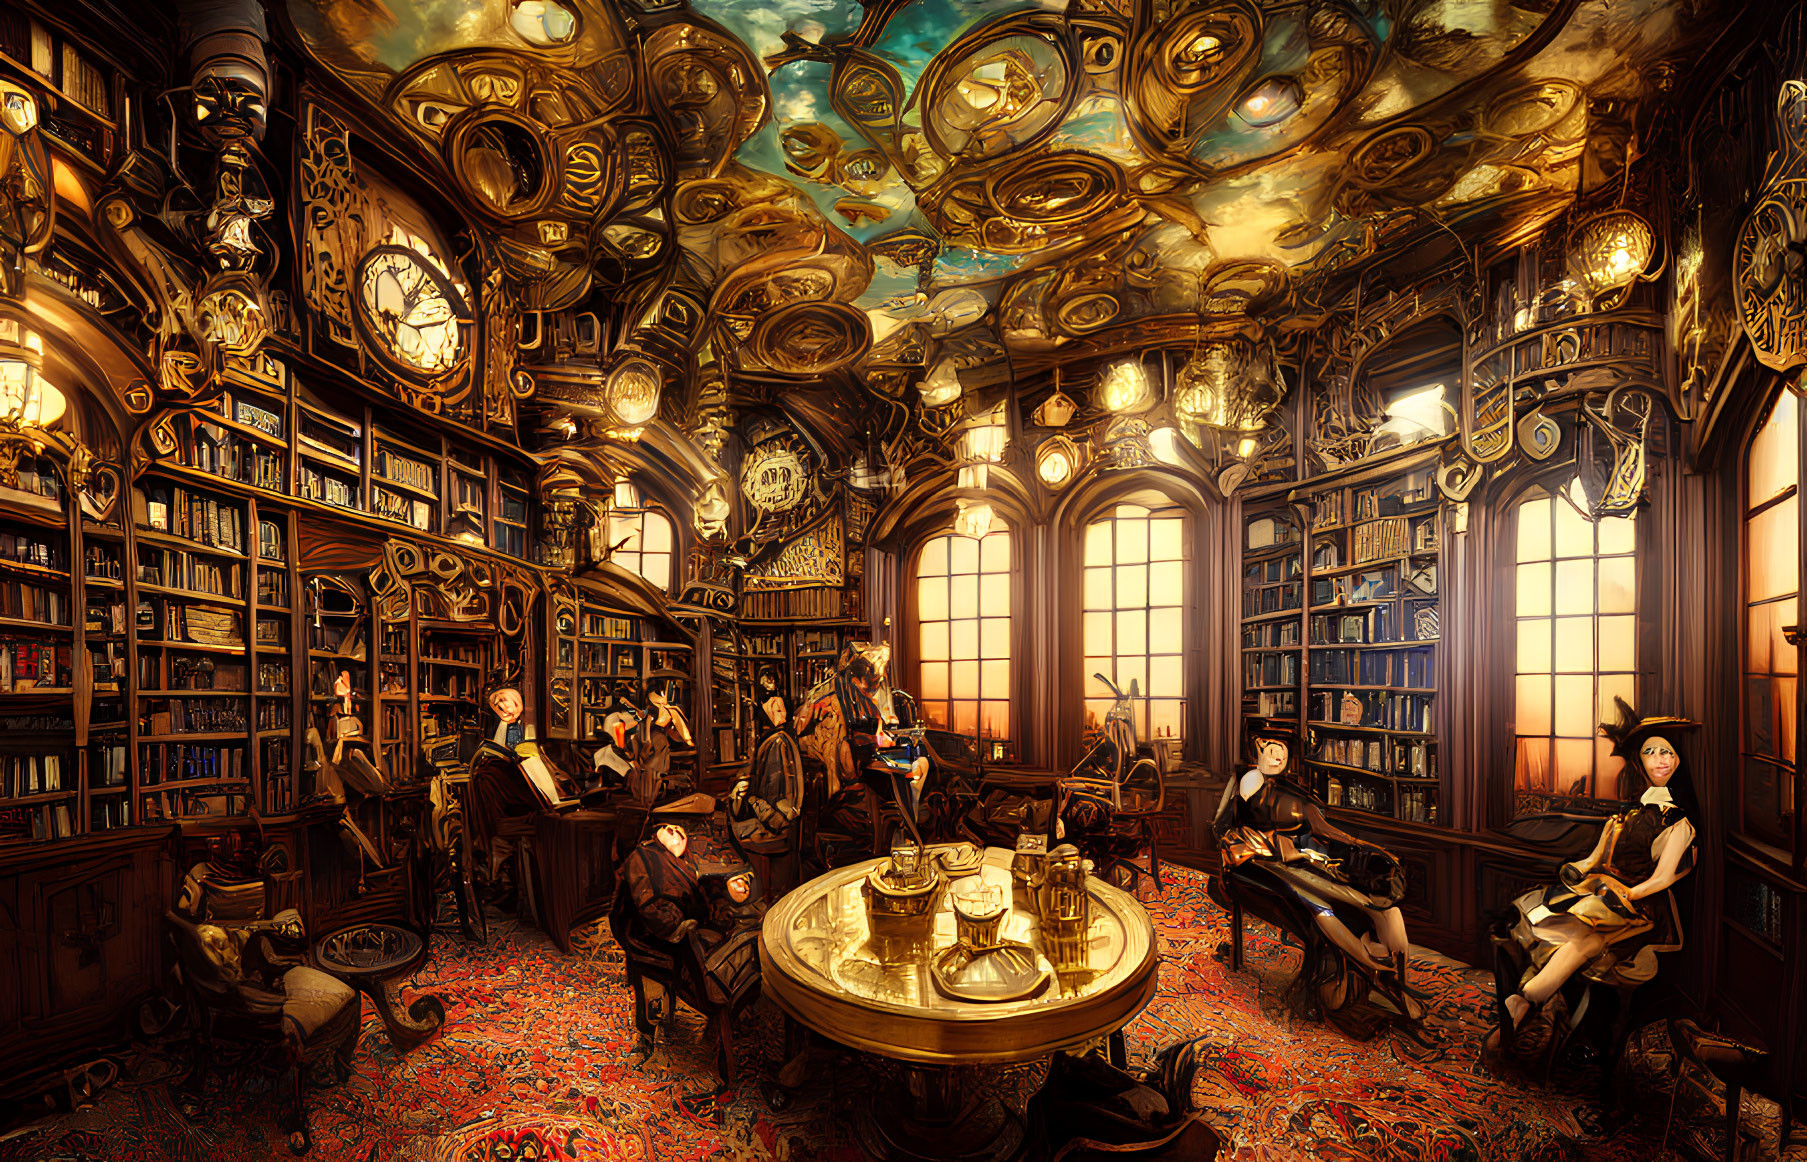 Luxurious steampunk library with books, clocks, globes, and guests in warm lighting